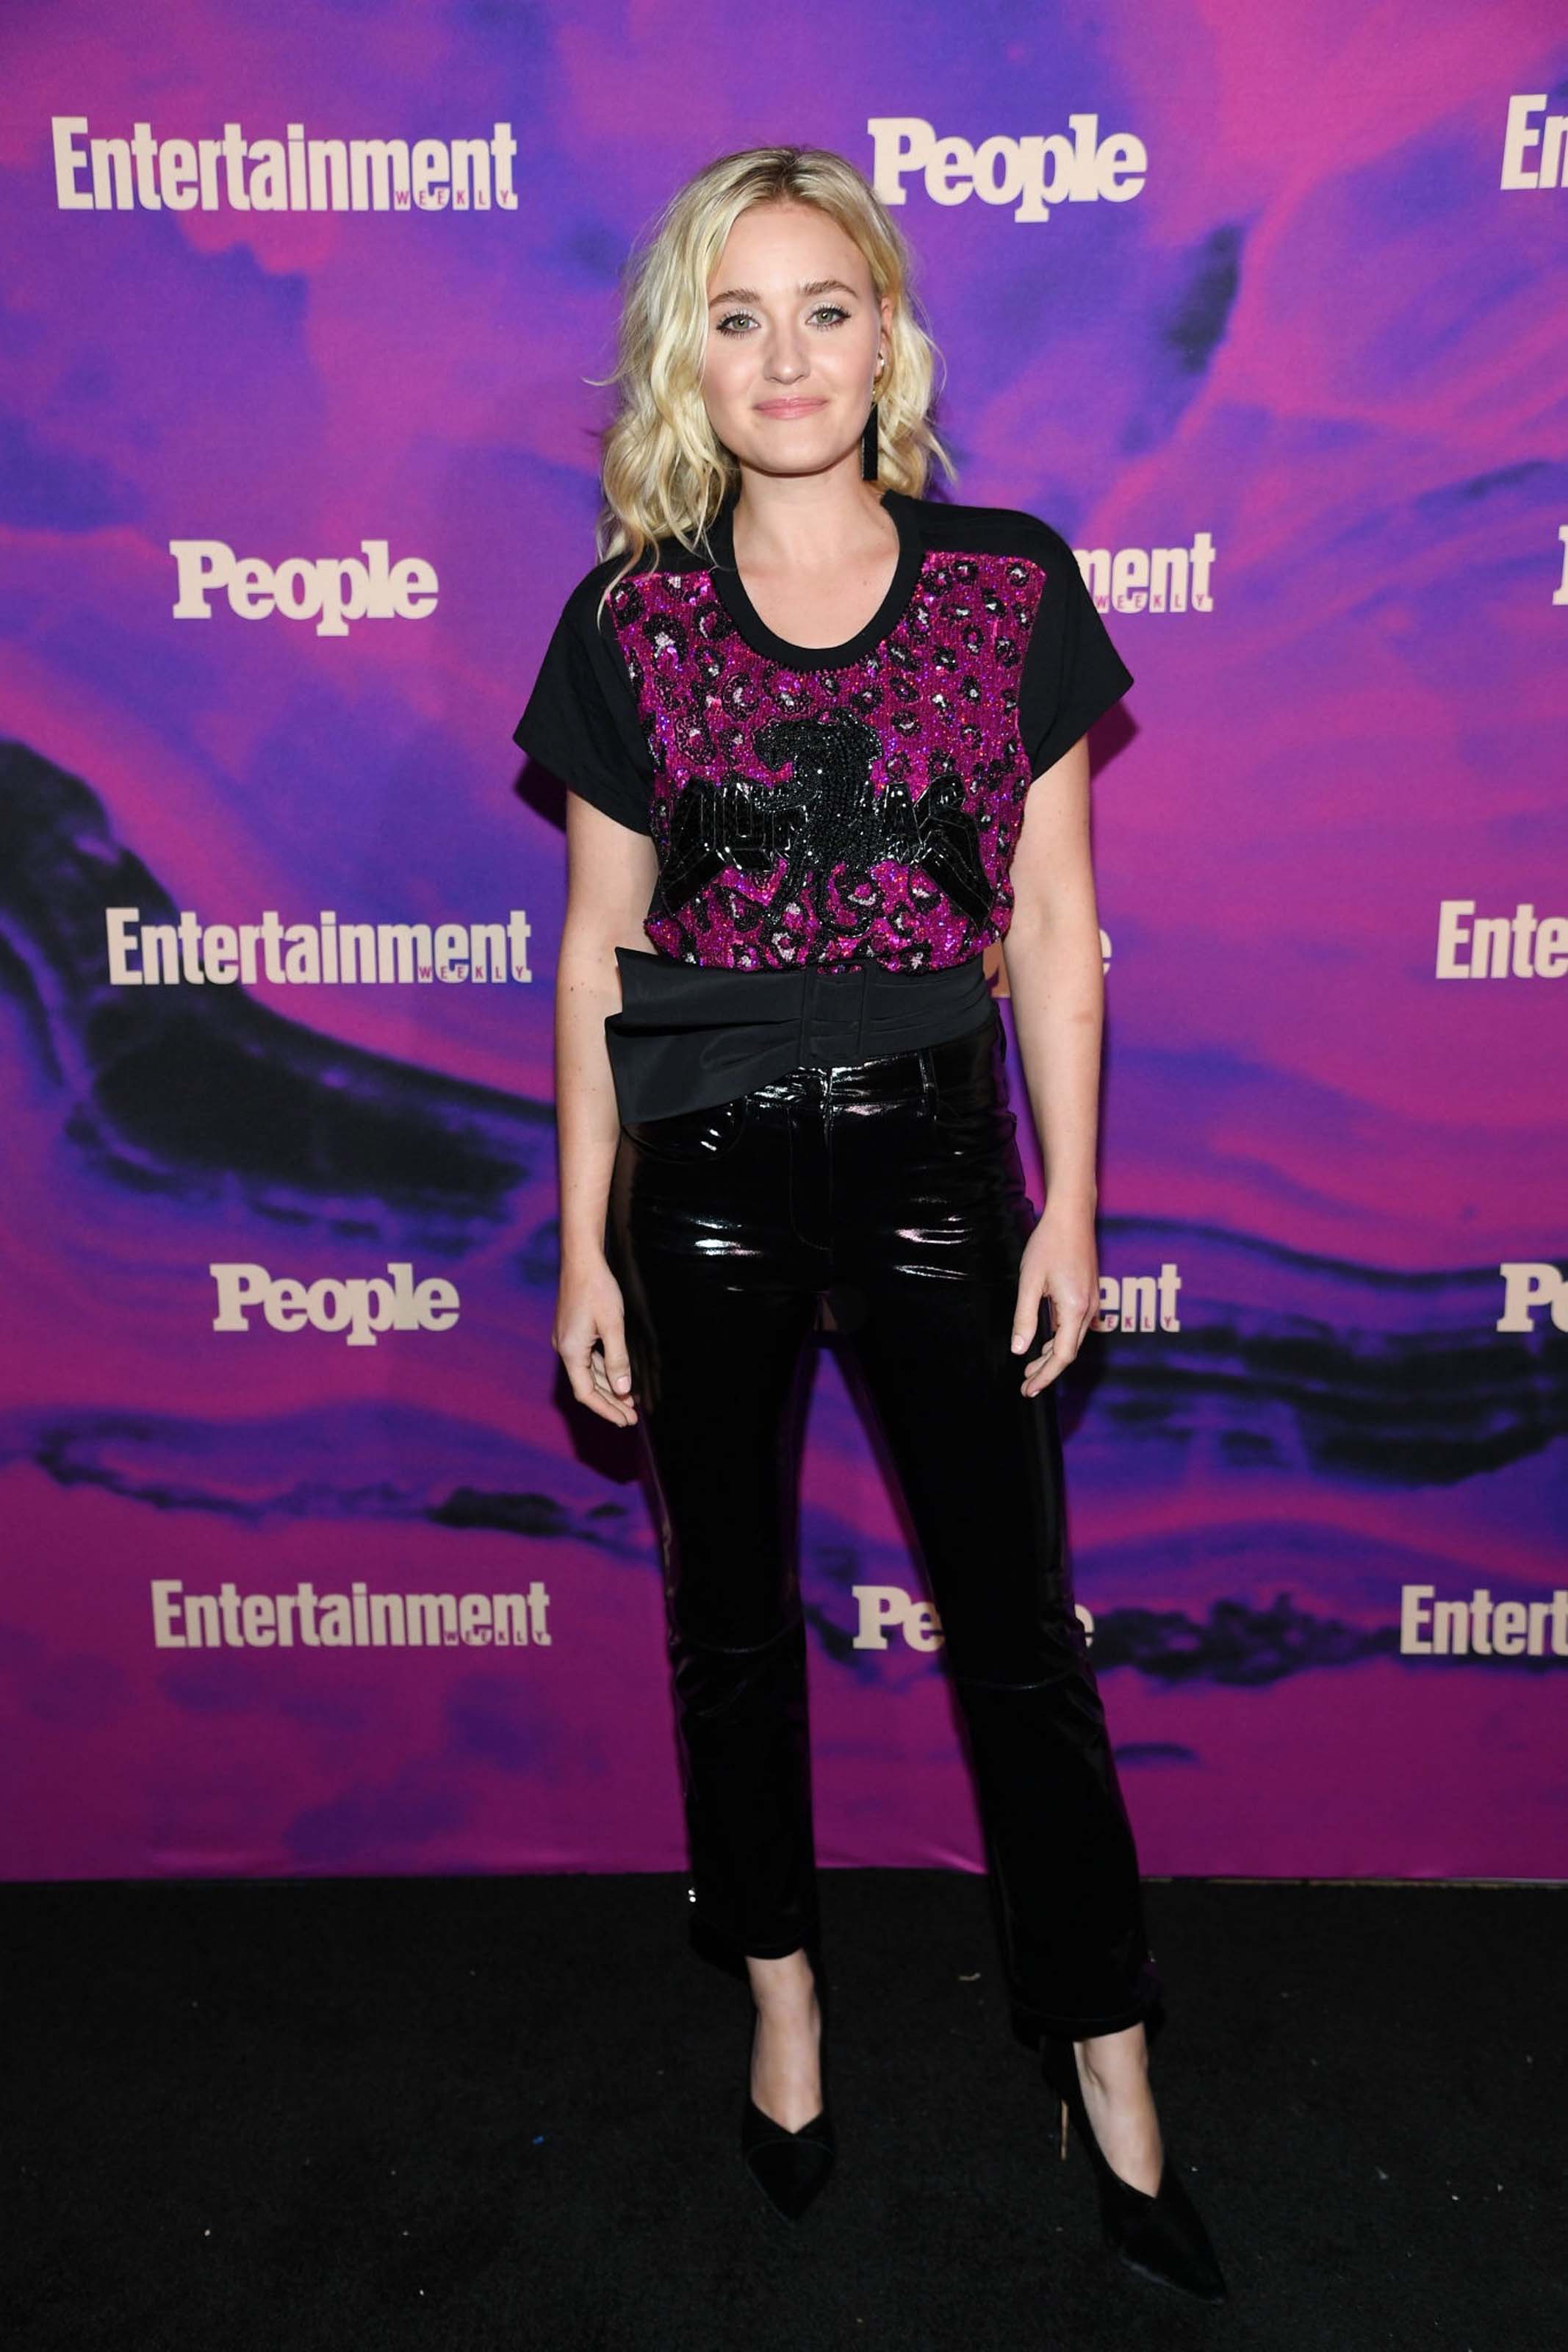 Amanda AJ Michalka attends Entertainment Weekly & People New York Upfronts Party